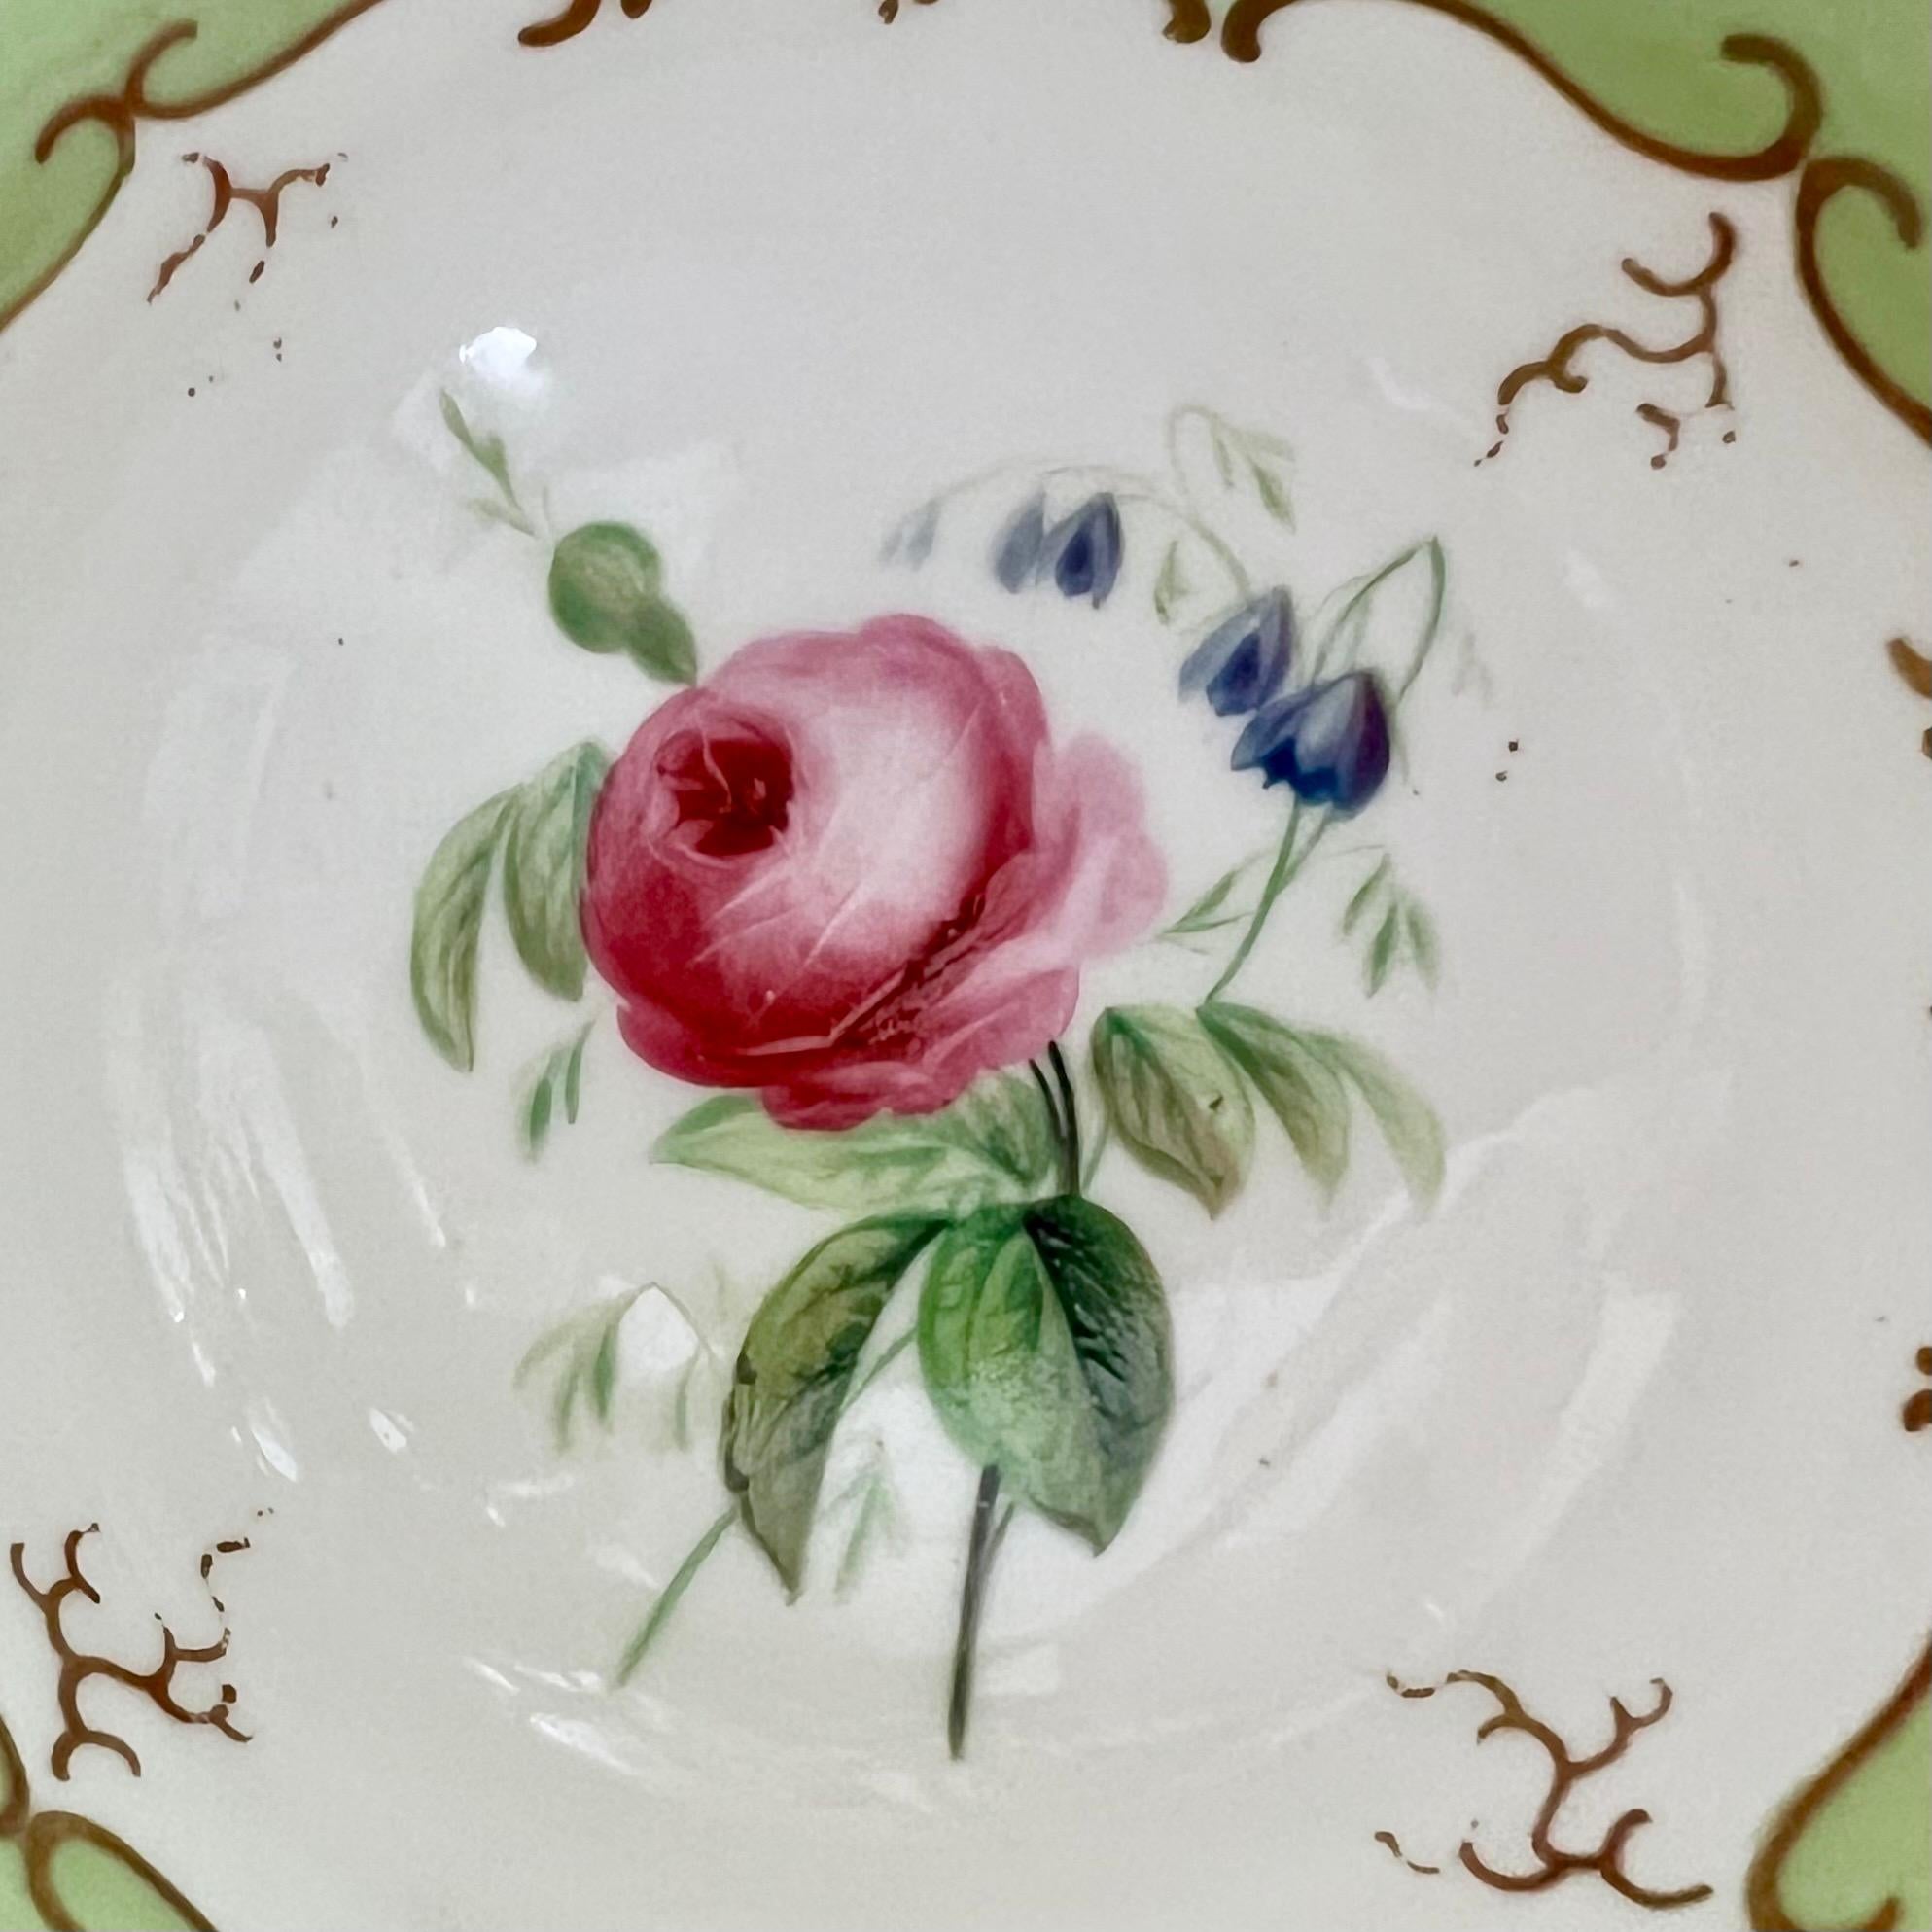 H & R Daniel Porcelain Teacup, Apple Green with Pink Roses, Rococo Revival C1840 3